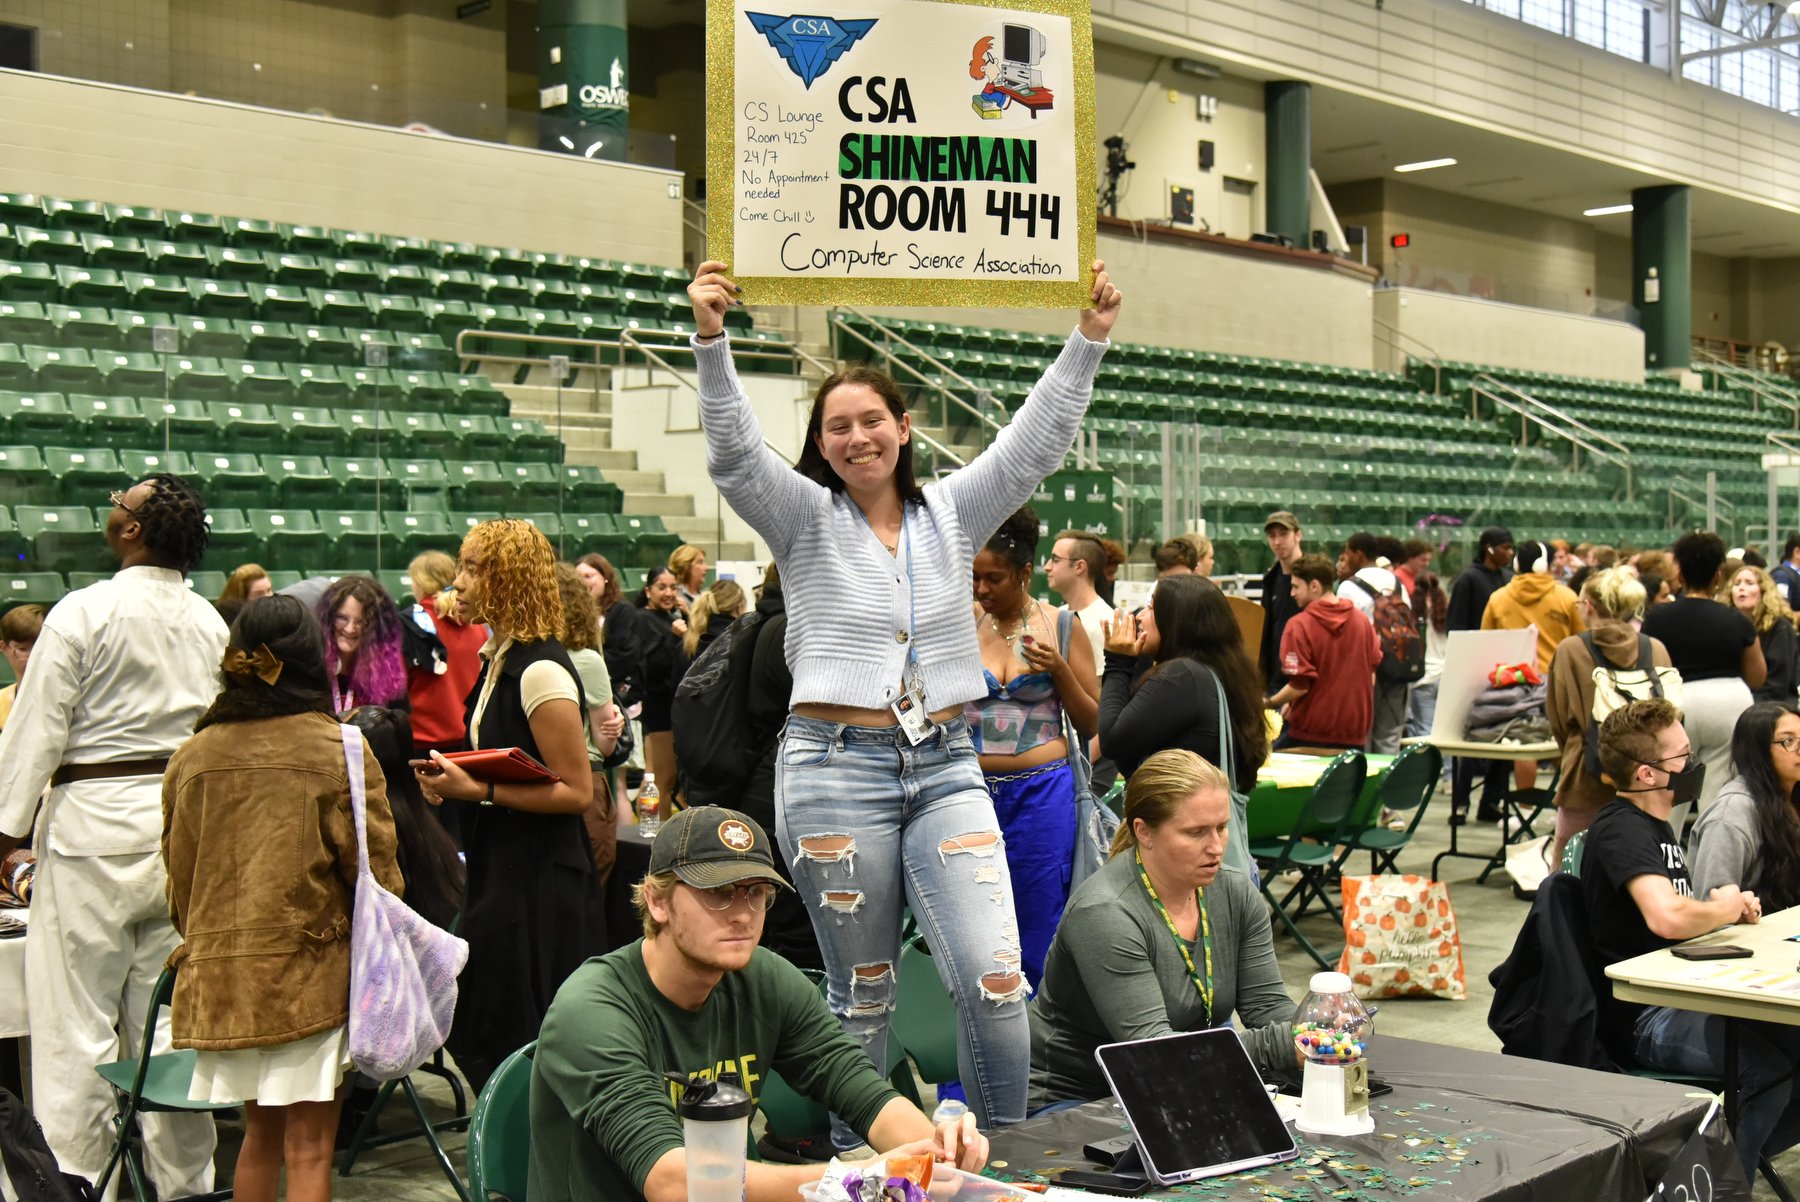 The Computer Science Association communicates their meeting location -- Room 444 in the Shineman Center -- during the fall Student Involvement Fair.